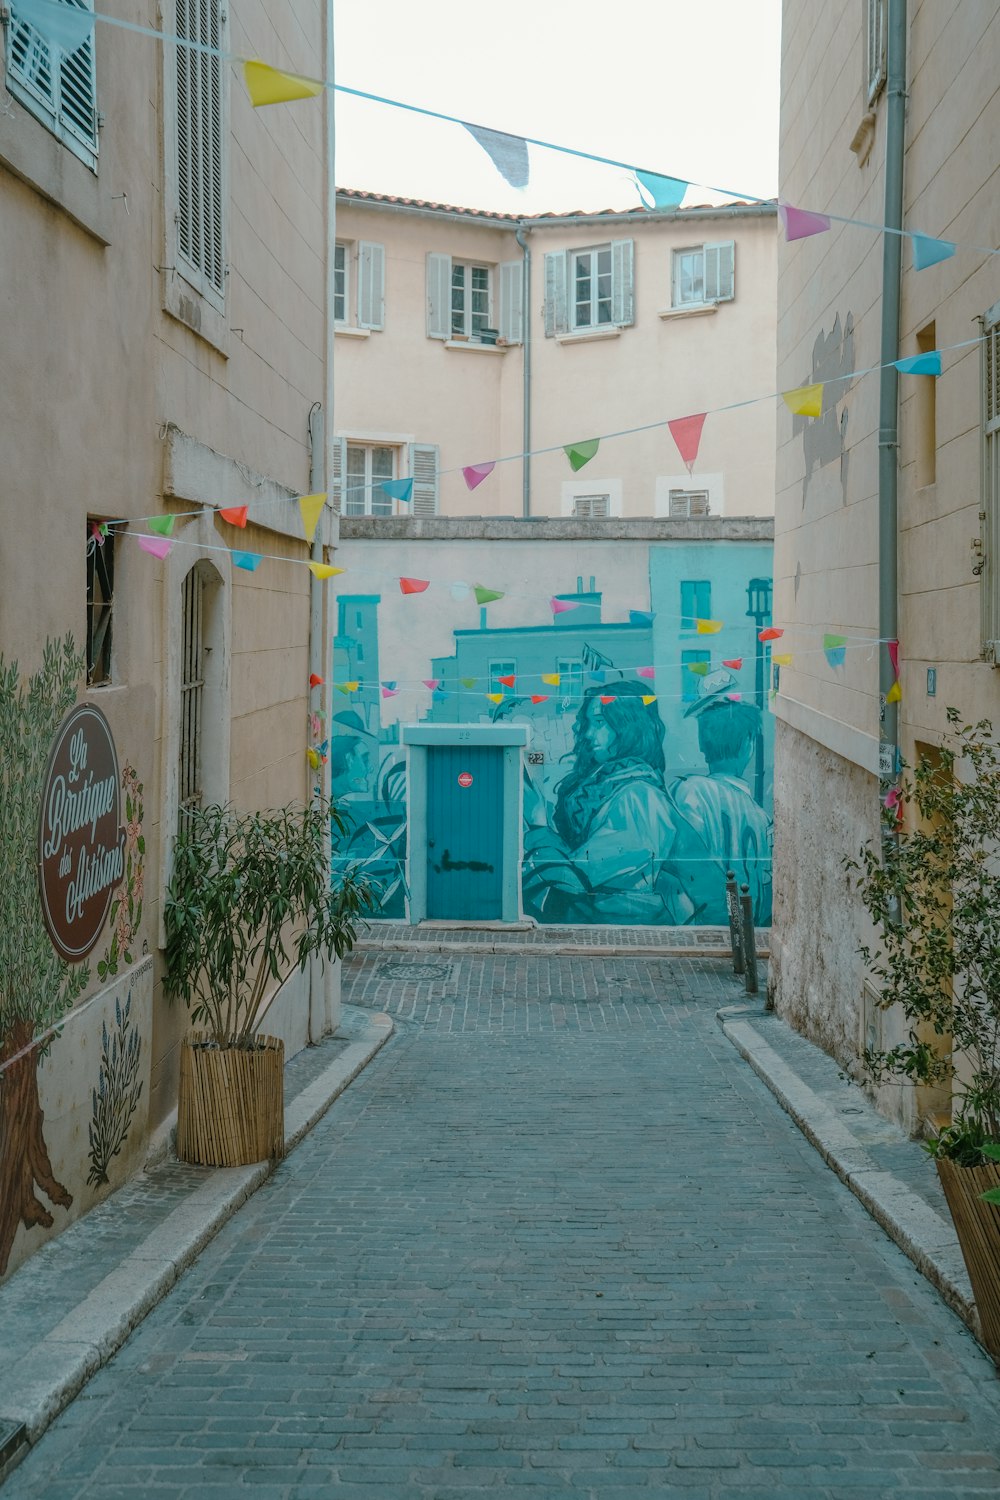 an alley way with a mural on the wall